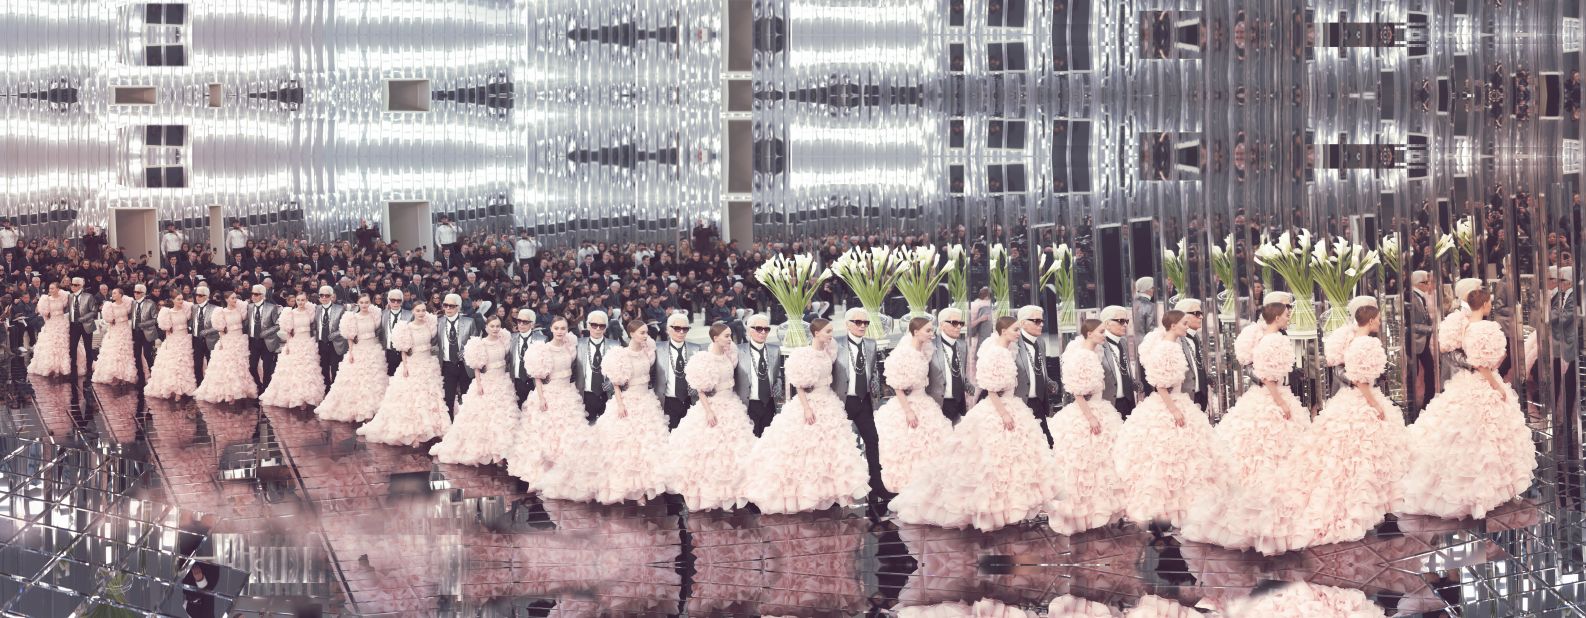 Simon Procter melded together multiple shots of model Lily-Rose Depp and Lagerfeld from the Haute Couture Spring-Summer 2017 show to create an impossible hall of mirrors.